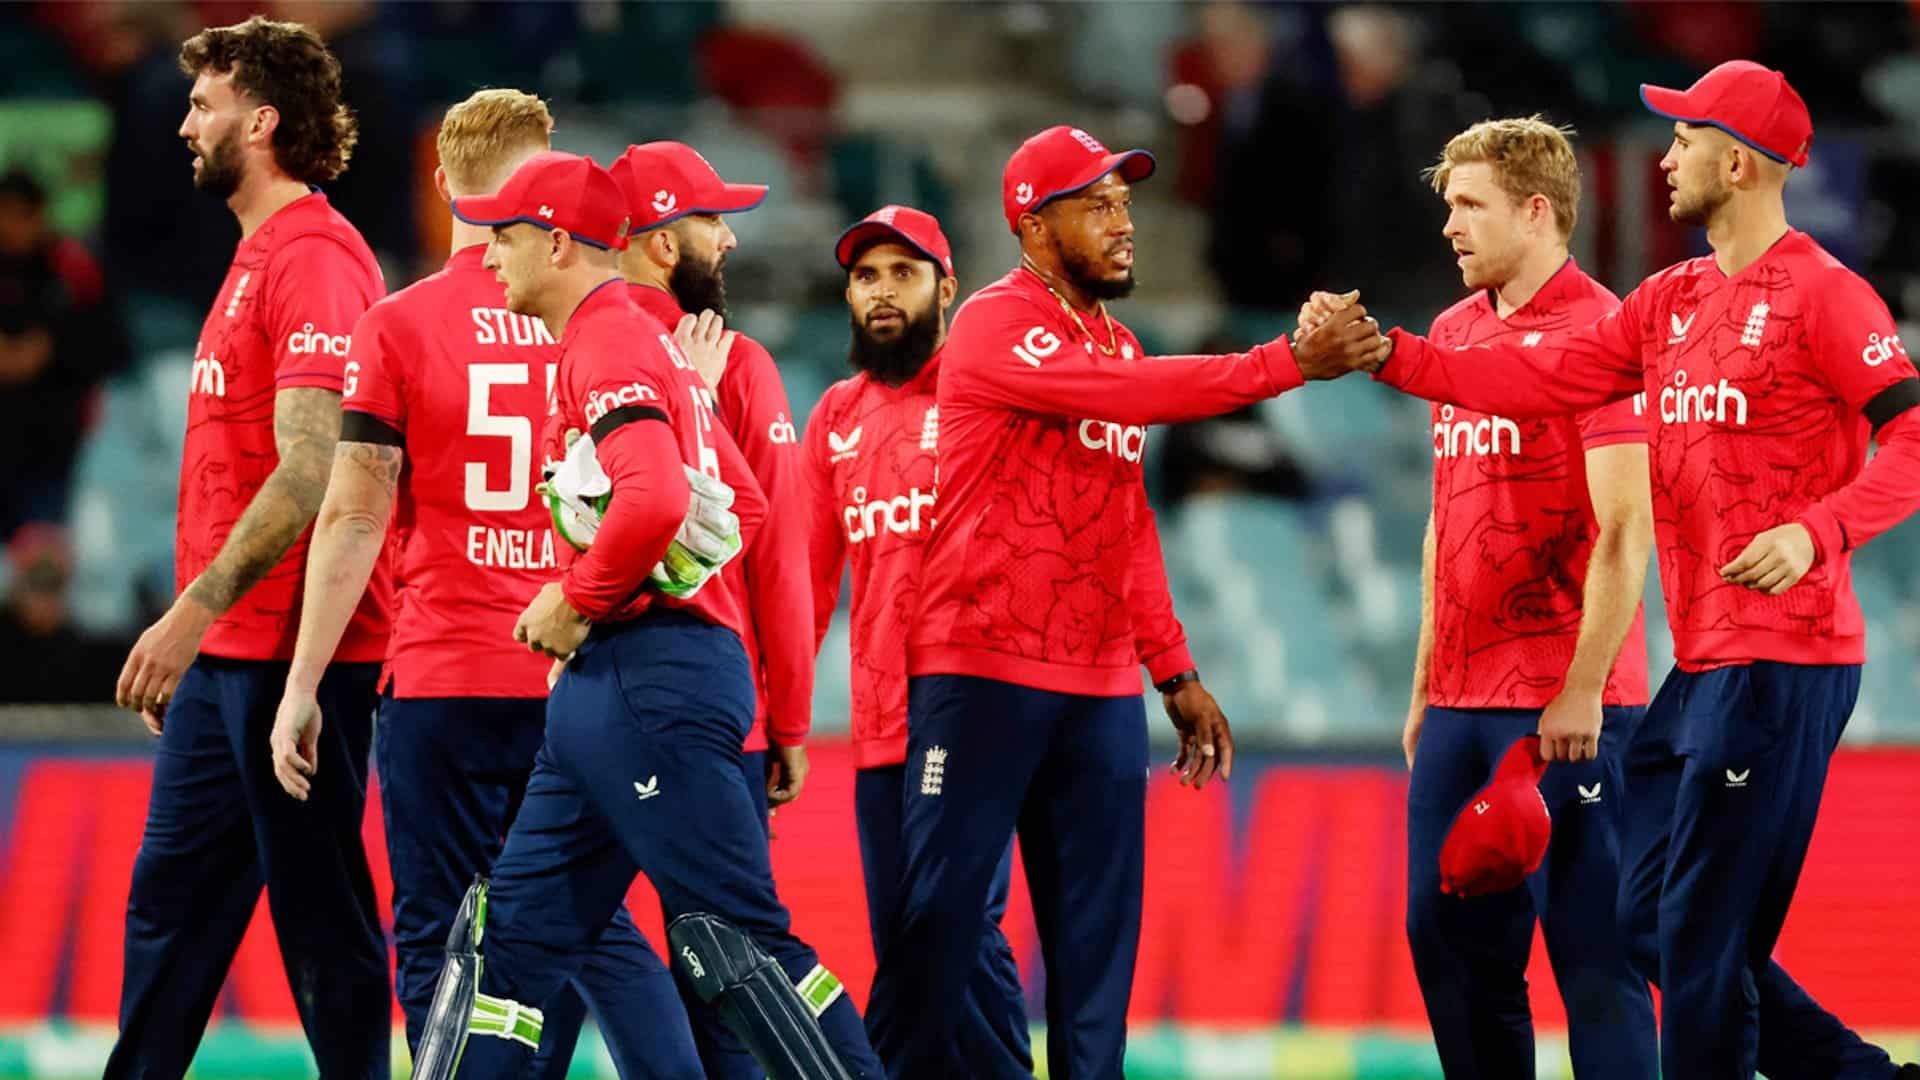 AUS vs ENG 3rd T20I: Match Preview, Key Players, Cricket Exchange Fantasy Tips